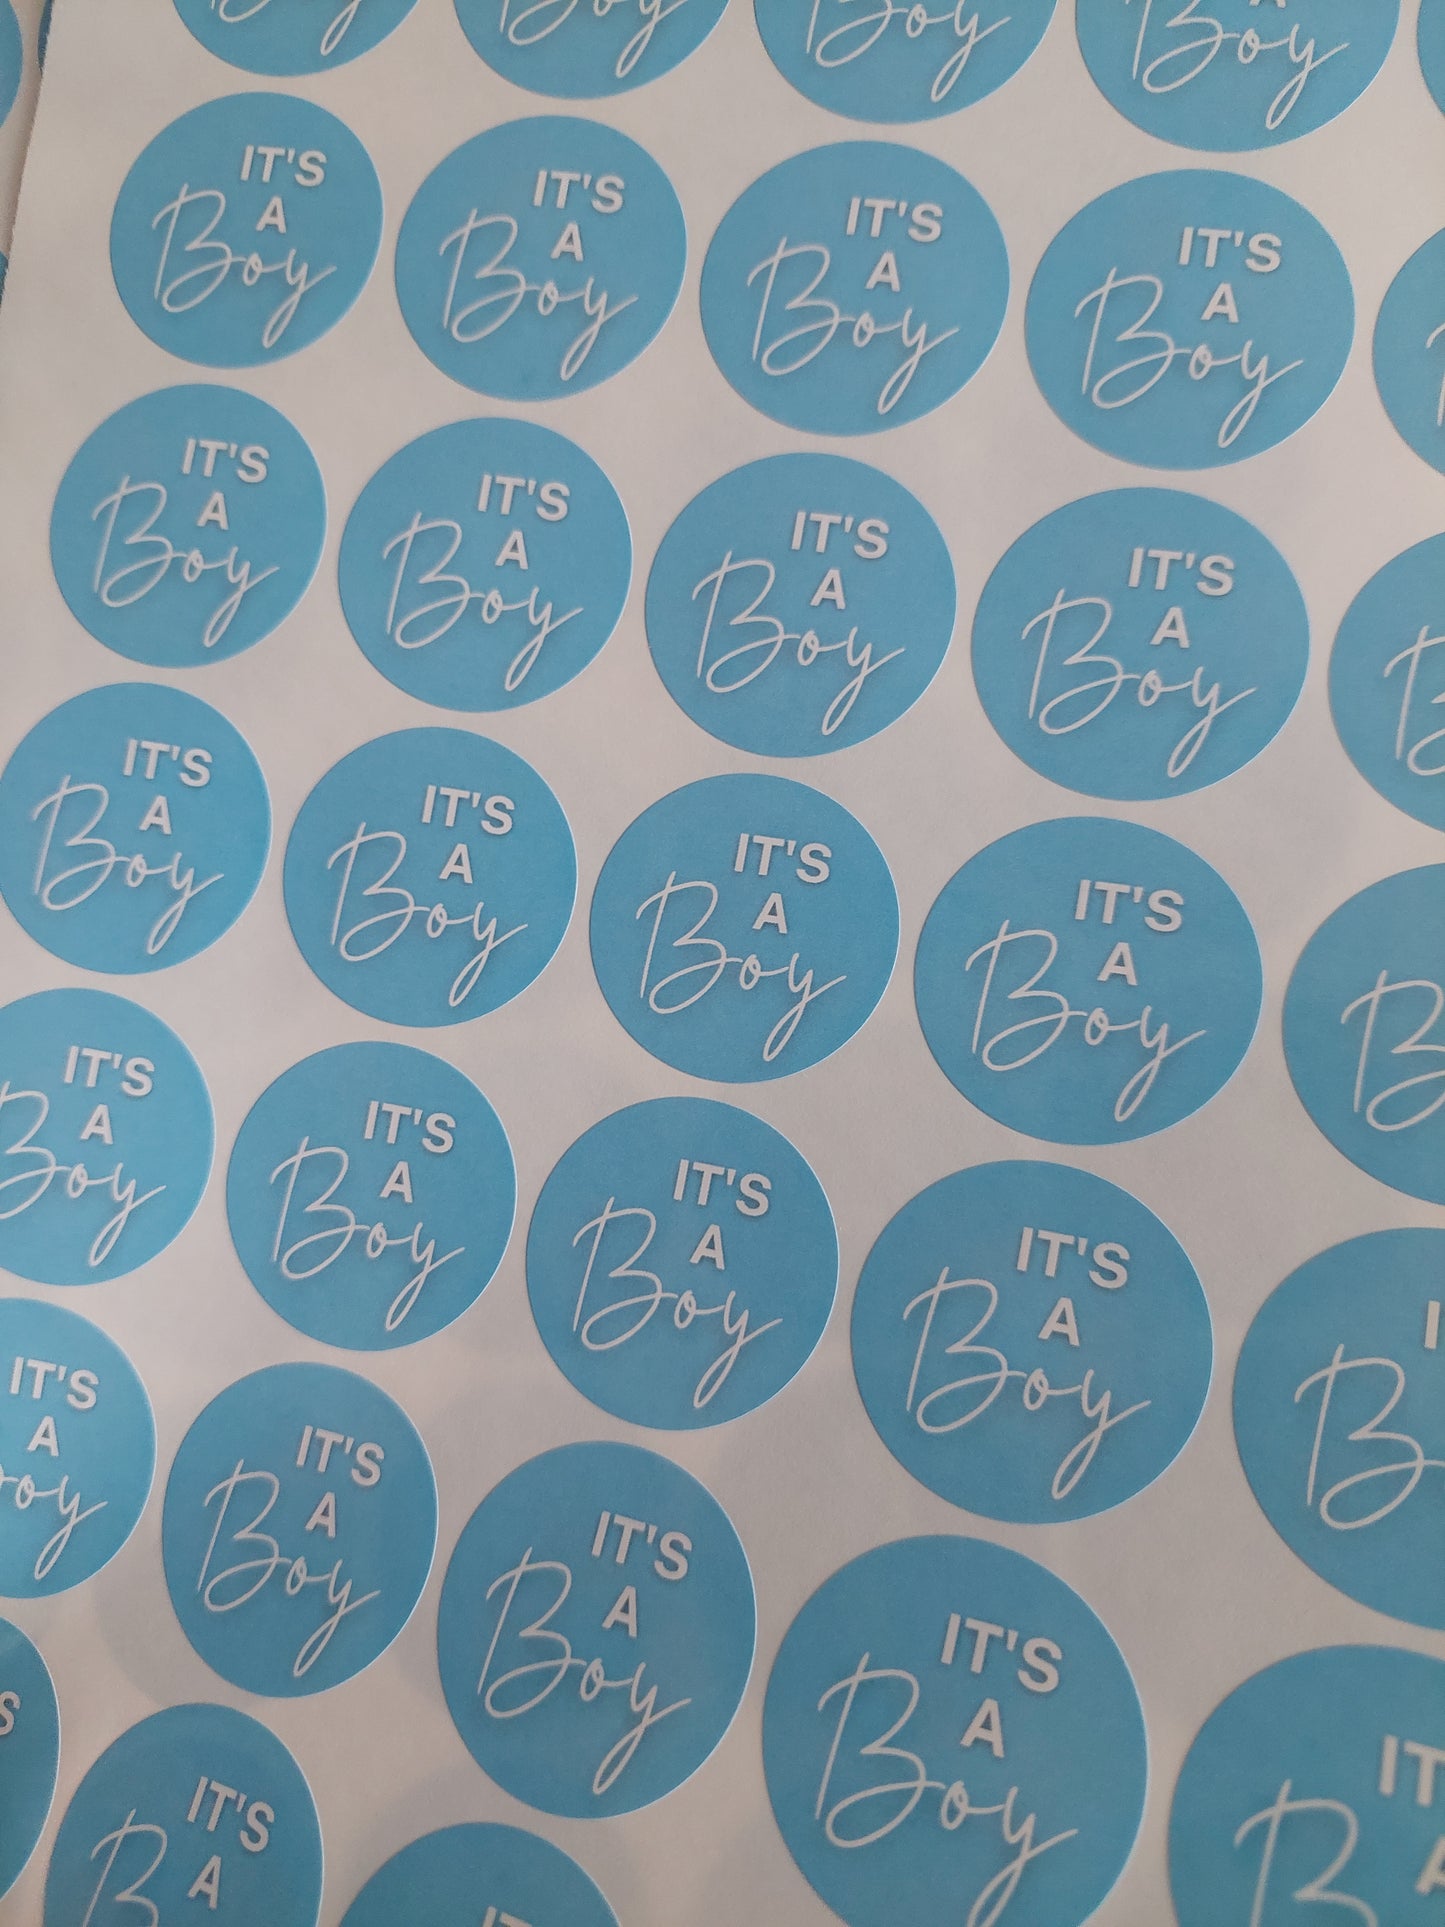 It's A Boy Stickers | Various Sizes | Baby Shower Party Stickers | Baby Boy Stickers